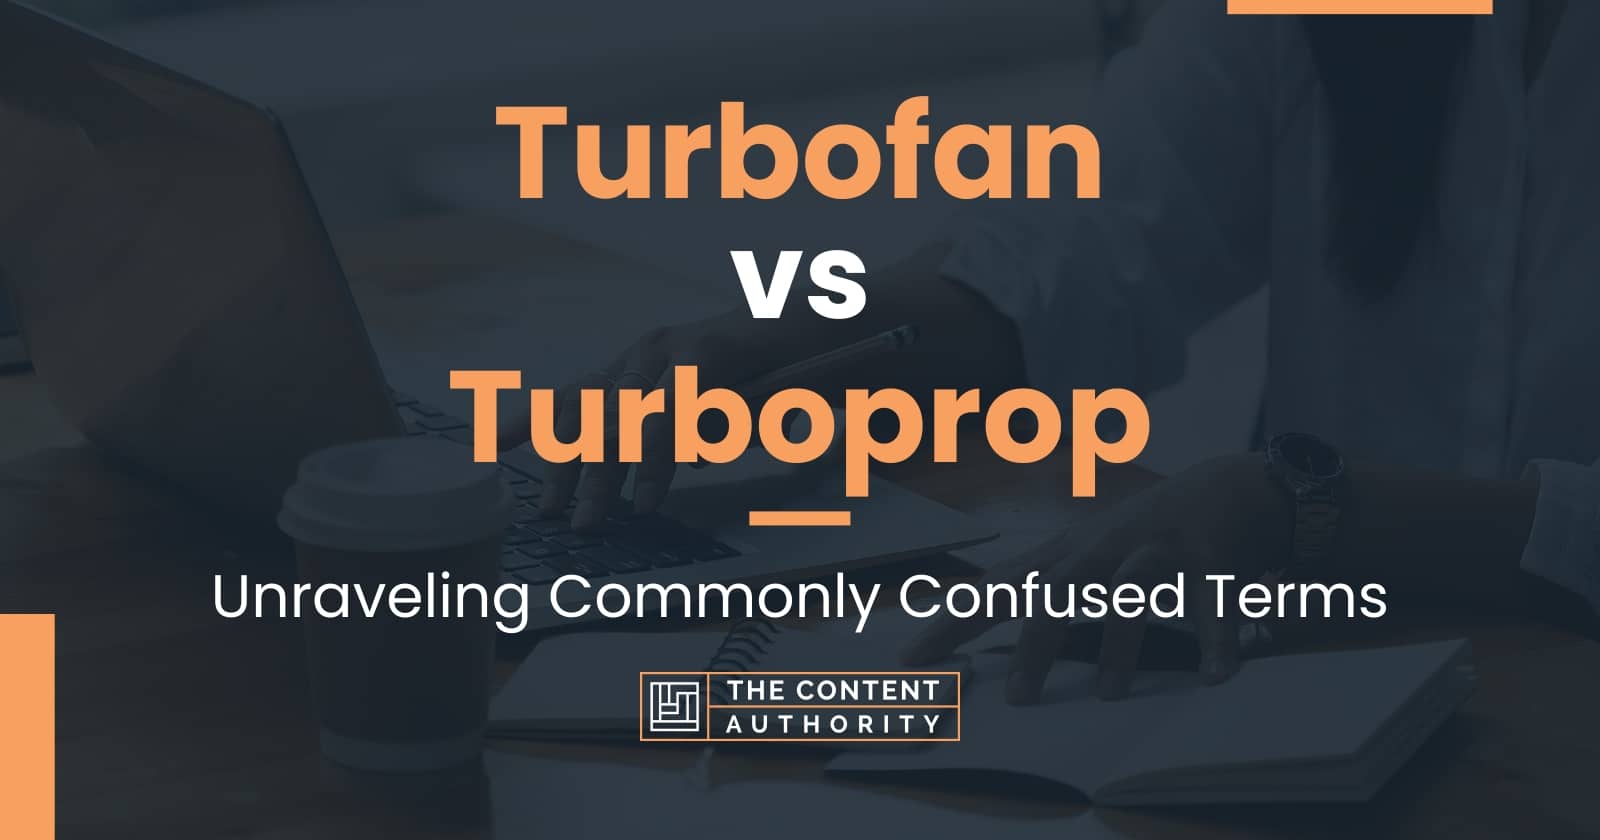 Turbofan vs Turboprop: Unraveling Commonly Confused Terms